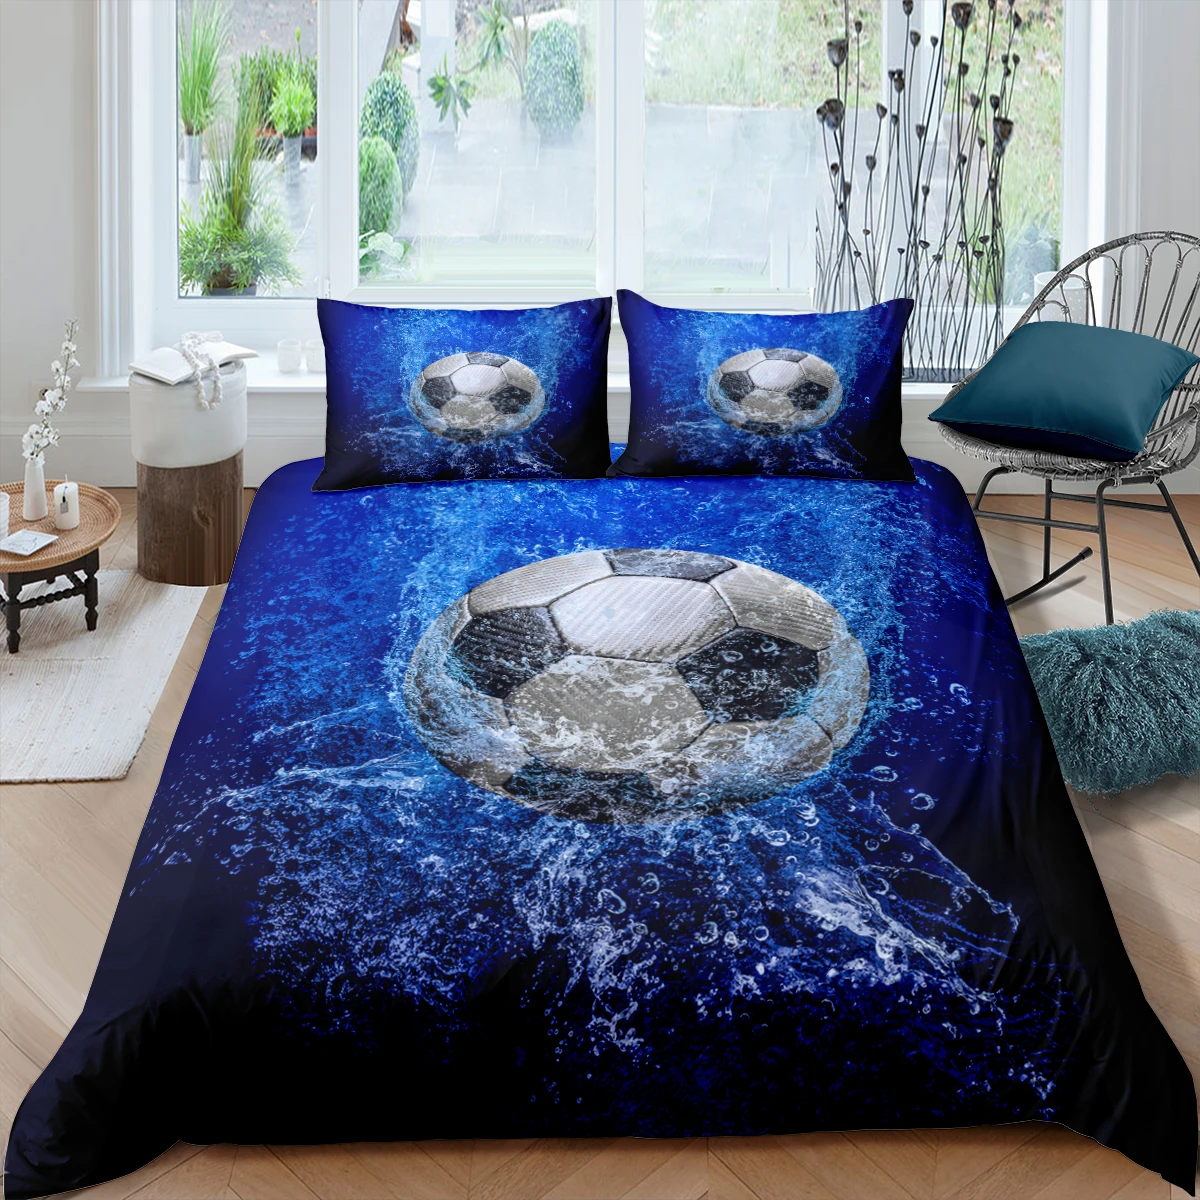 

Football Duvet Cover Soccer Bedding Sets Luxury Home Textiles Single Twin Teens Kids 2/3pc Quilt Cover With Pillowcase Bed Cover